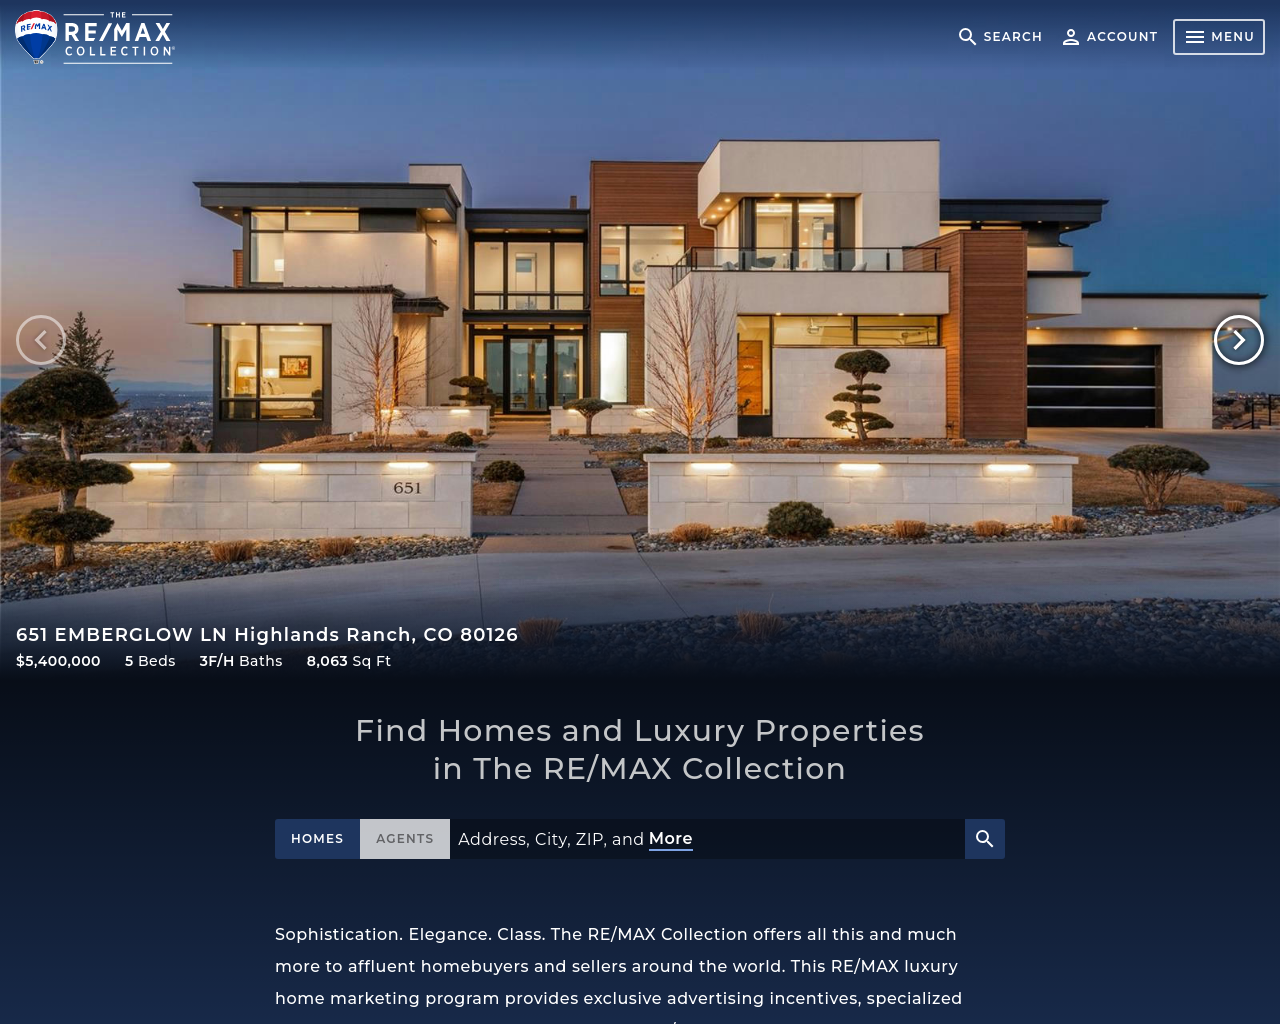 theremaxcollection.com